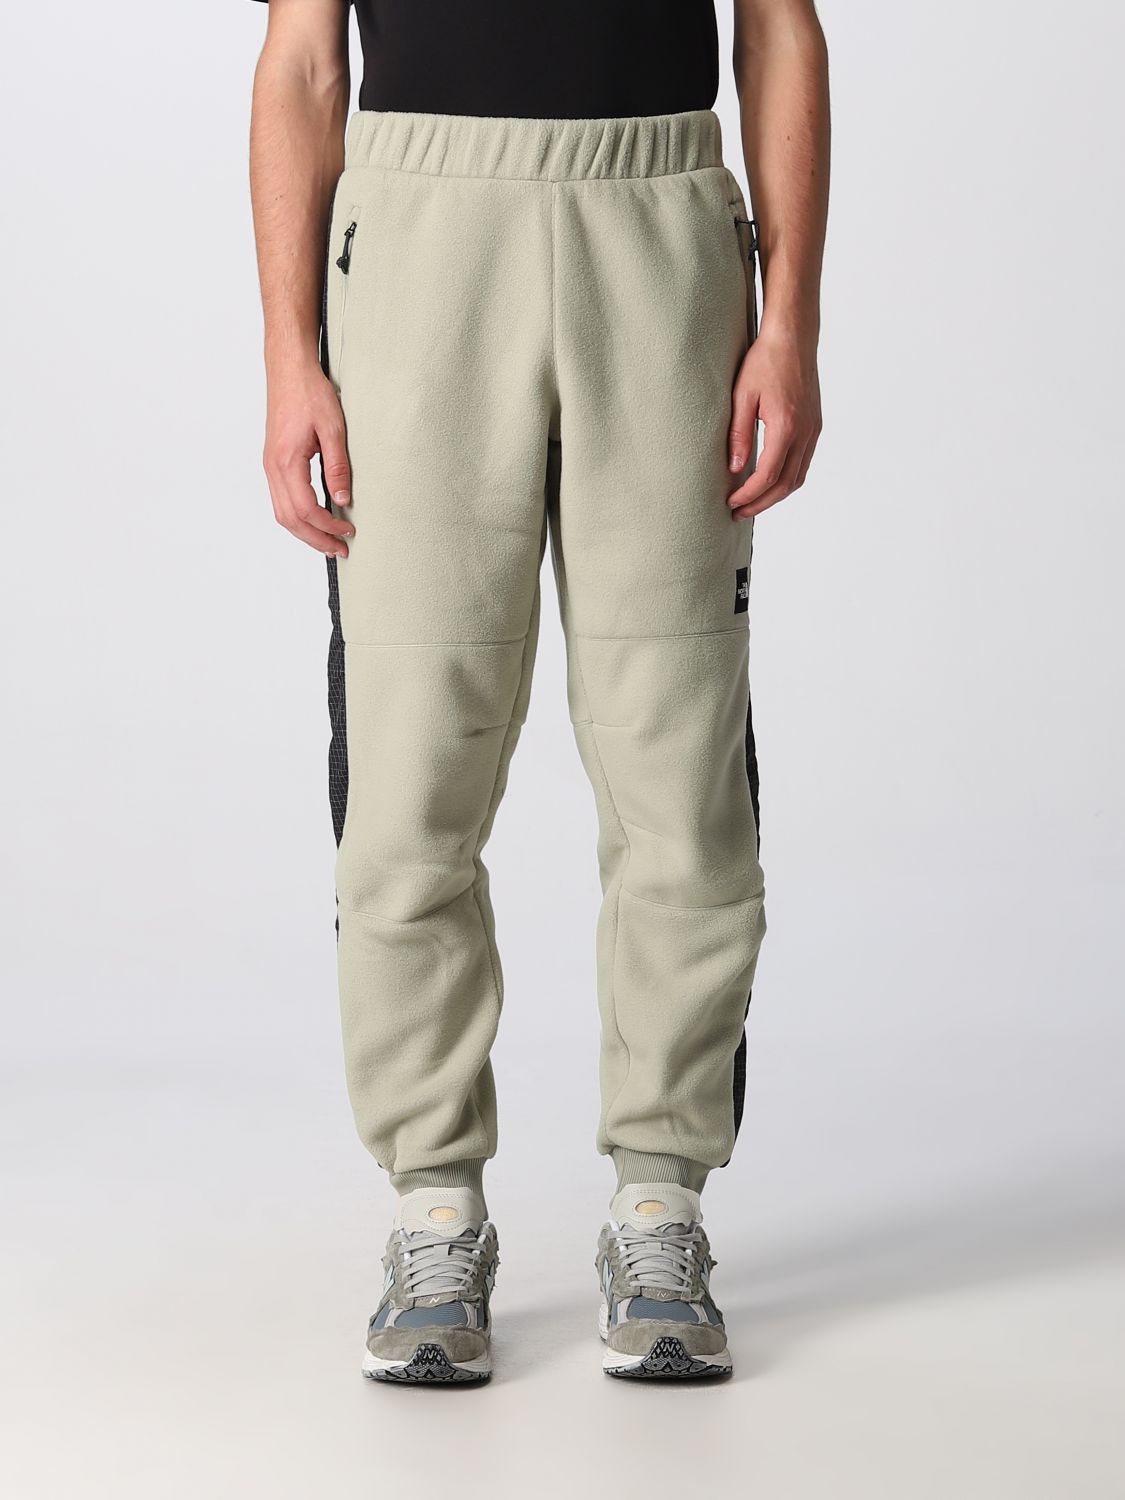 THE NORTH FACE: trousers for men - Green | The North Face trousers ...